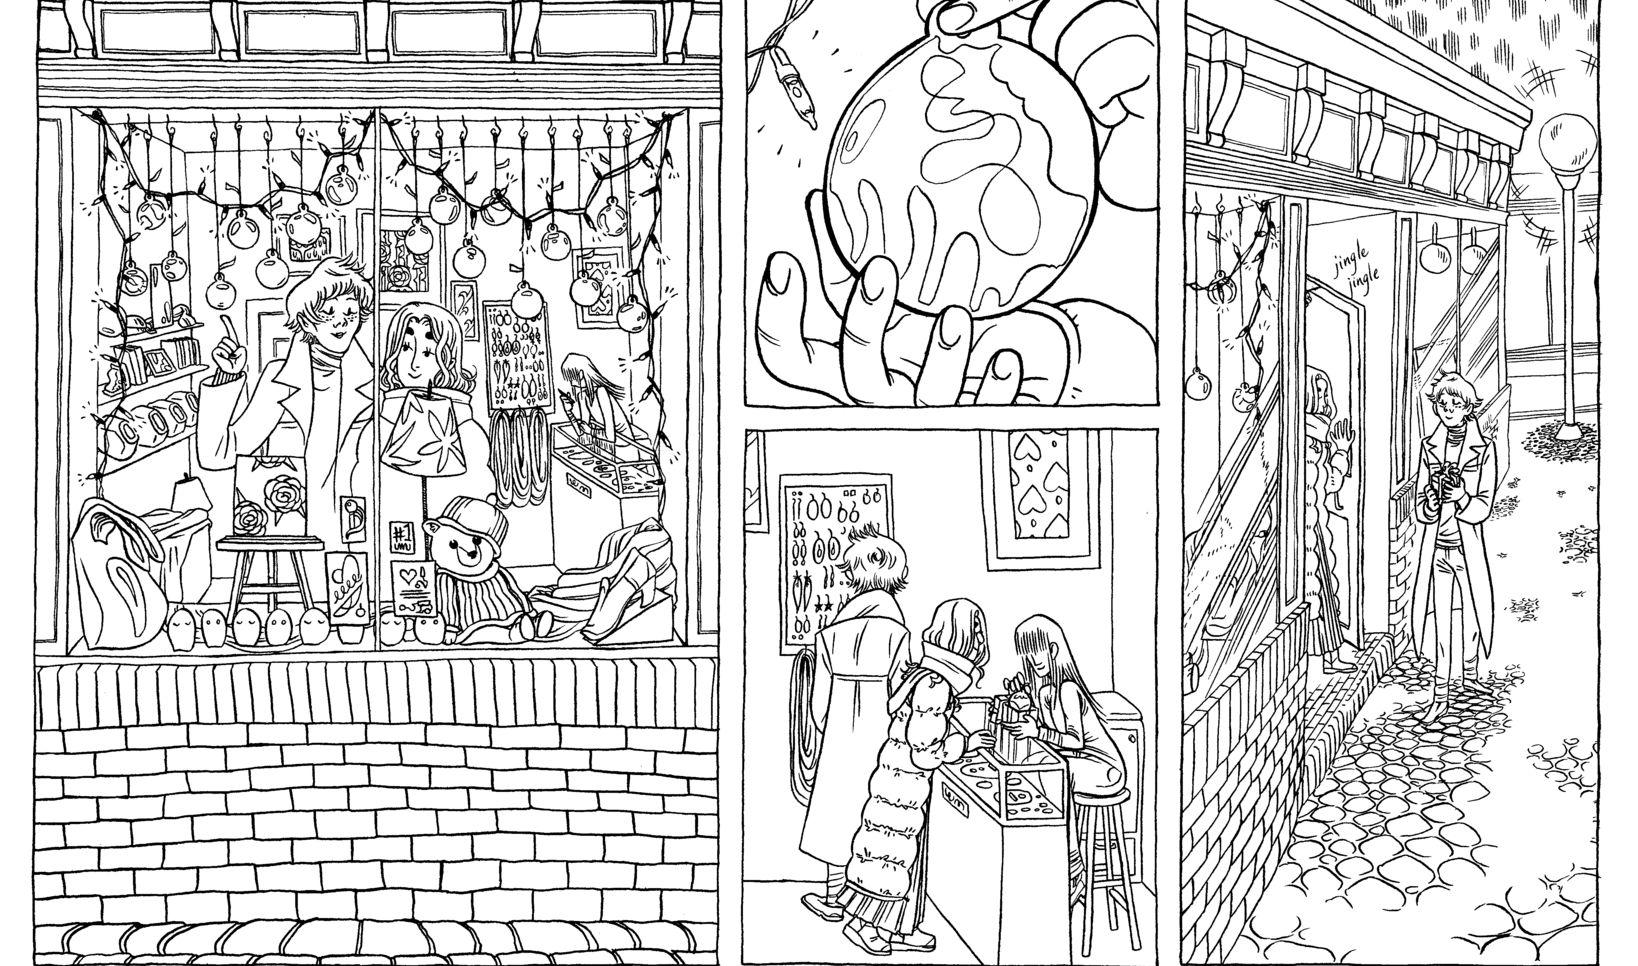 Two characters enjoying shop ornaments in this wintery comic. ; Edith Voges